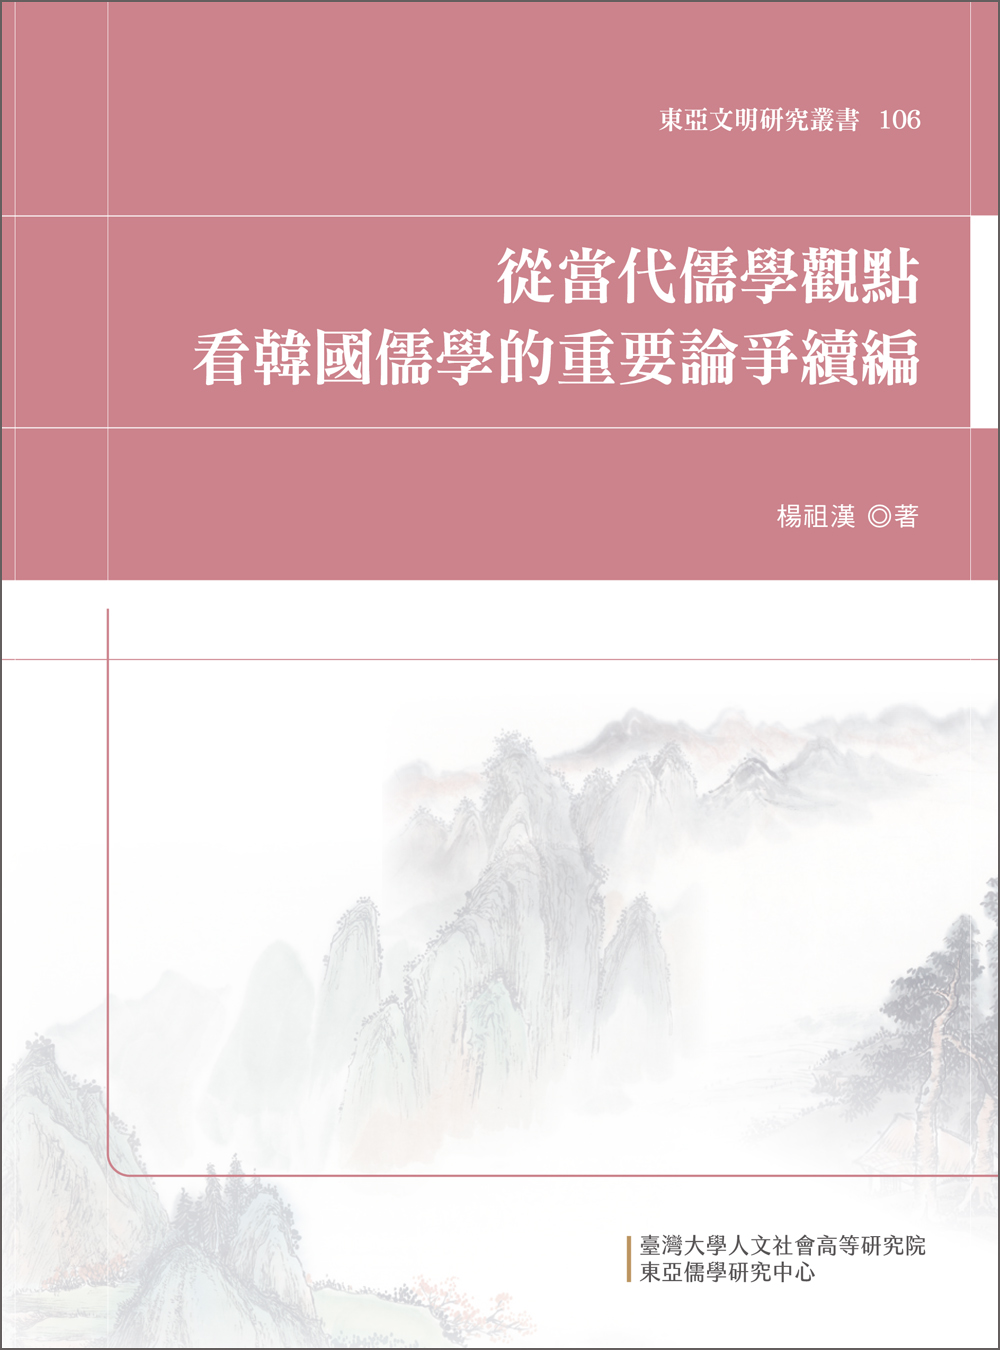 Perusing the Korean Confucianism’s Polemic from the Contemporary Confucianism’s Viewpoint Ⅱ